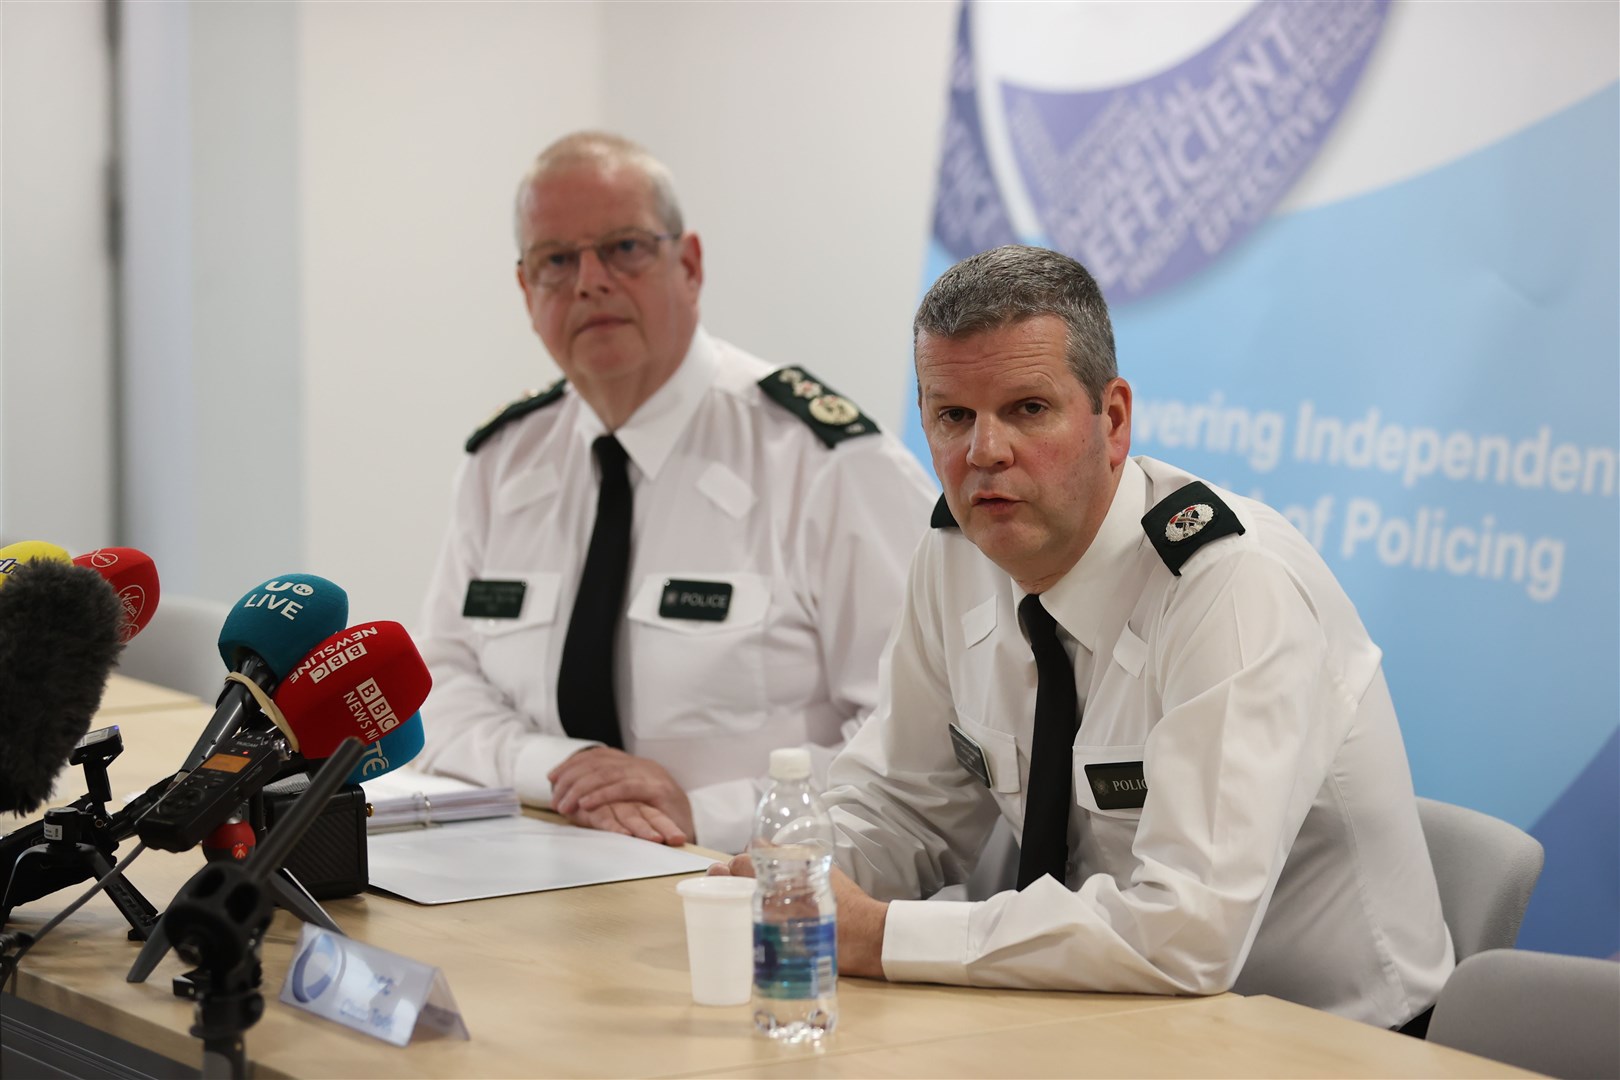 Police Service of Northern Ireland (PSNI) Chief Constable Simon Byrne (left) and Assistant Chief Constable Chris Todd during a press conference after an emergency meeting of the Northern Ireland Policing Board (Liam McBurney/PA)